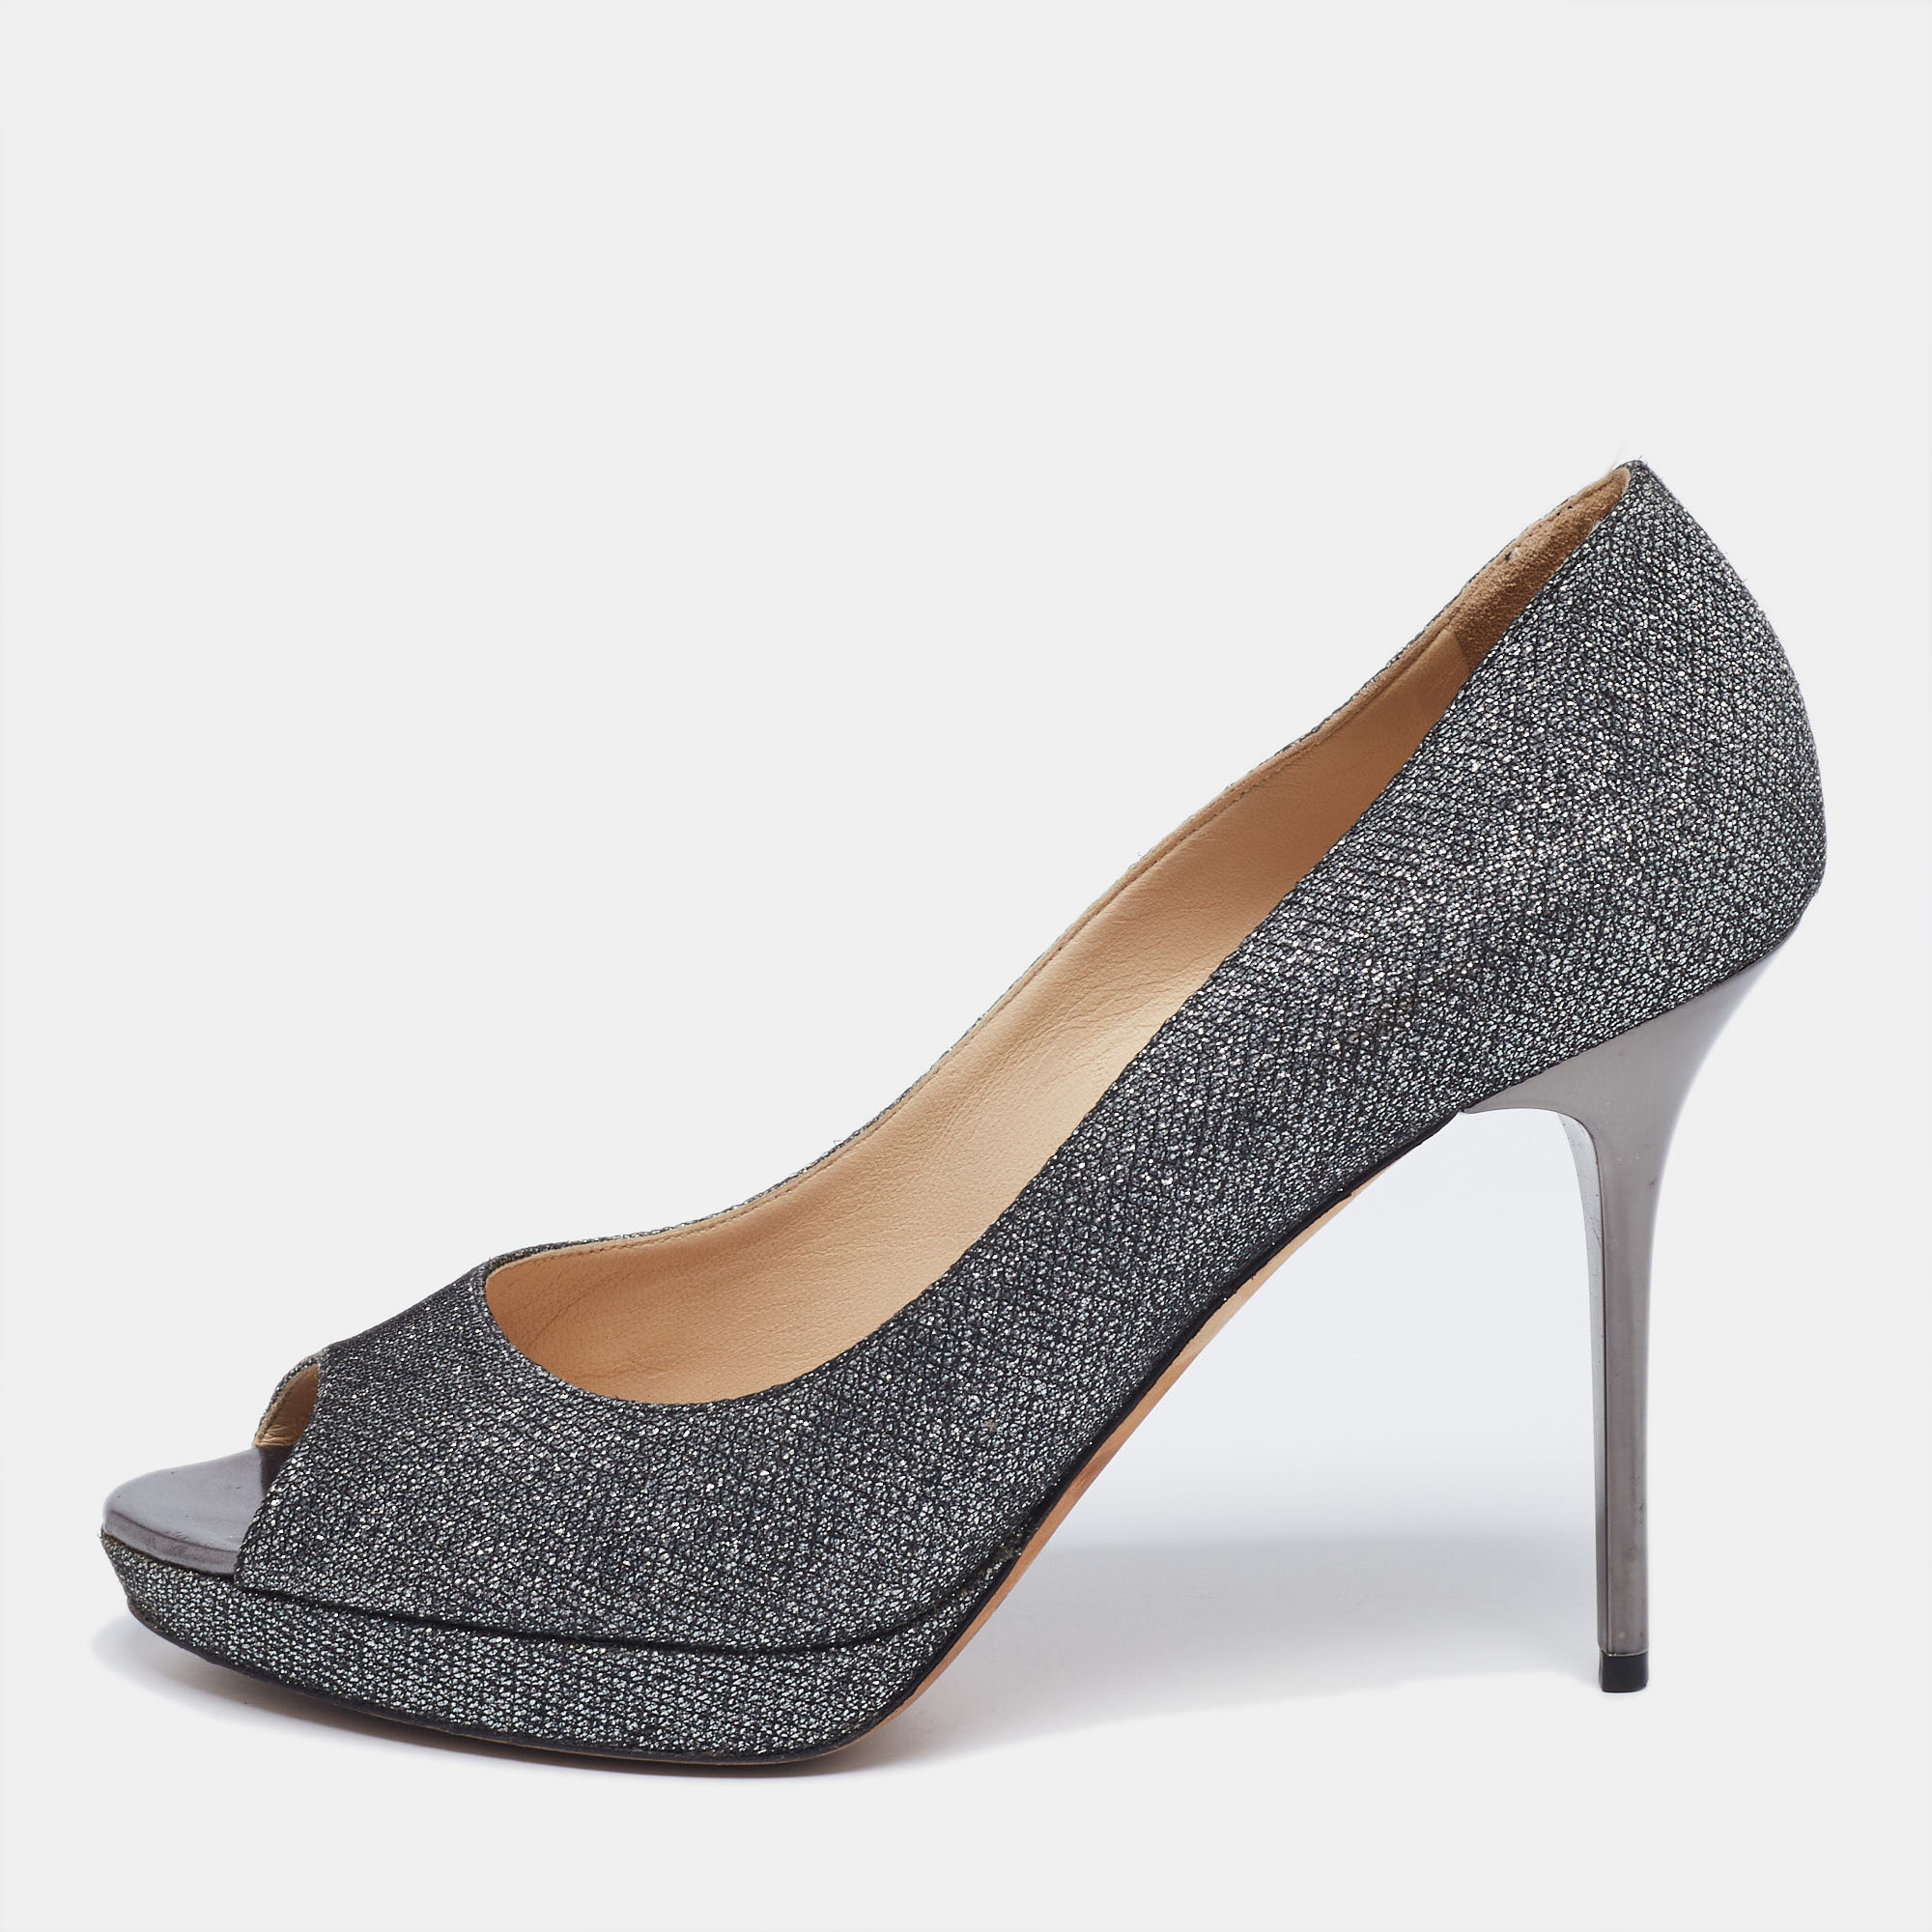 It is easy to fall in love with these pumps by Jimmy Choo Theyve been beautifully crafted from silver glitter and designed with peep toes platforms and 11 cm heels. The pumps are sure to complement all your dresses and evening gowns.